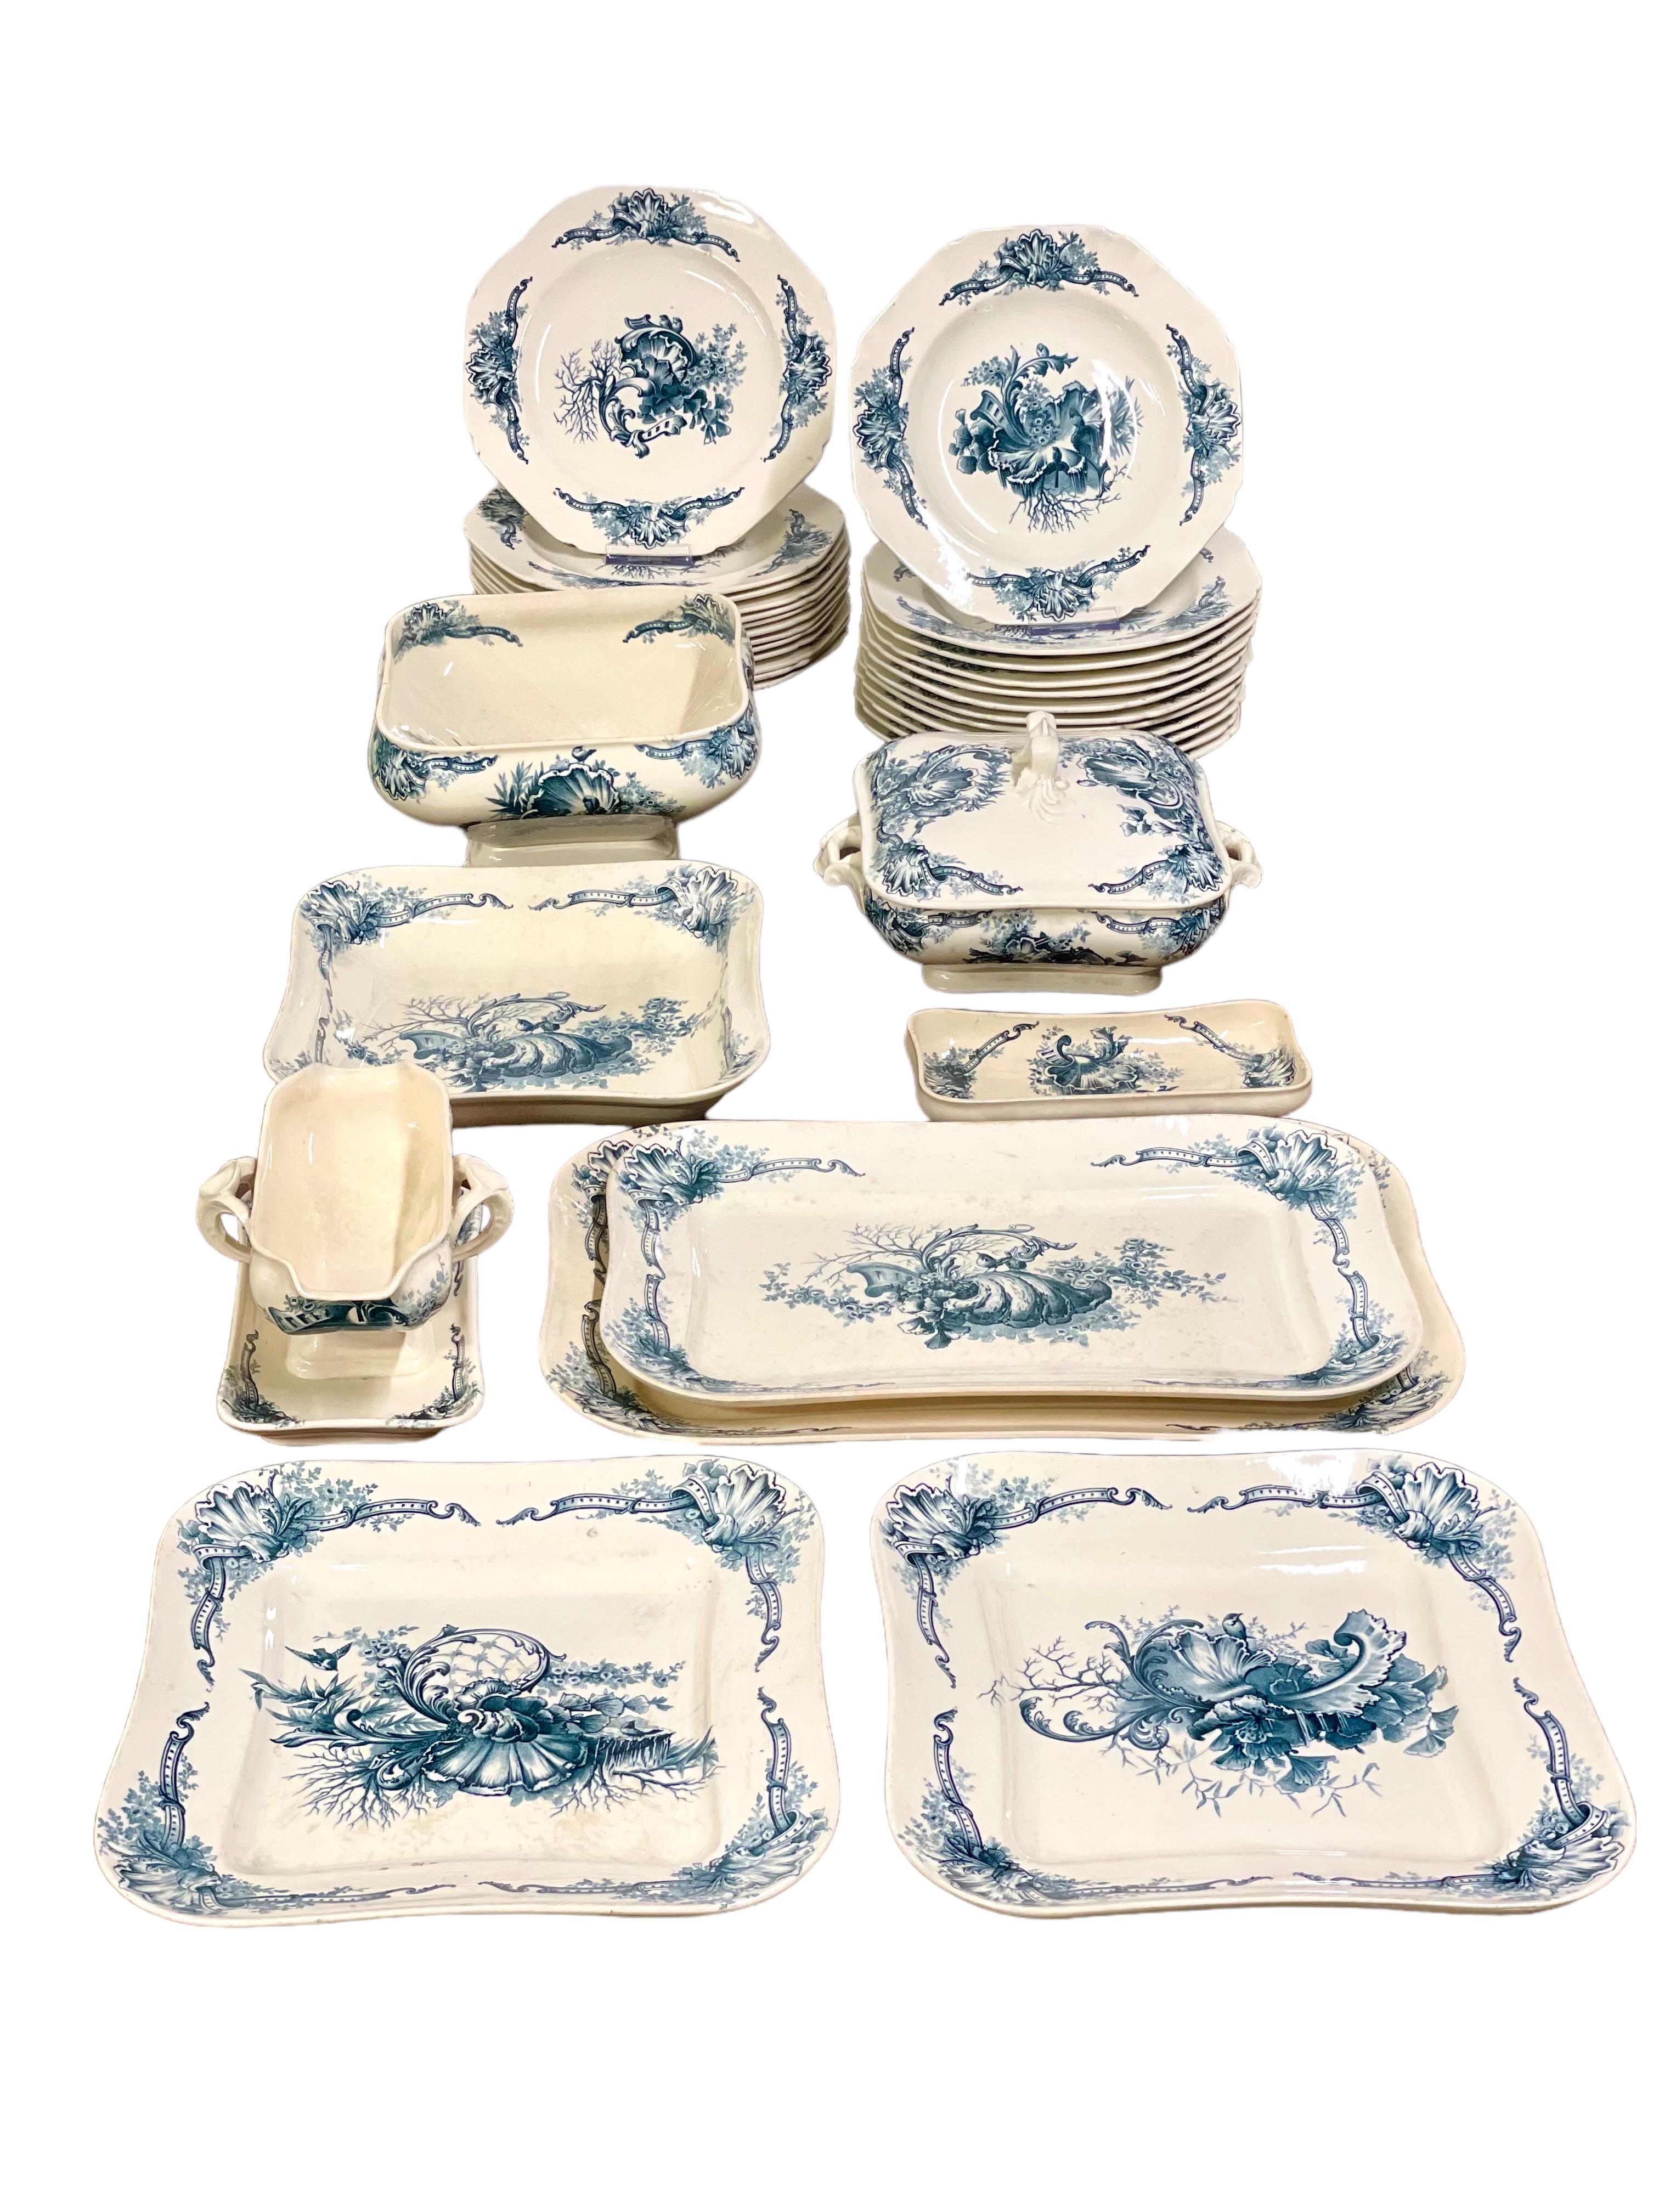 Antique French Blue and White Ironstone Dinner Set by Hautin Boulenger & Cie